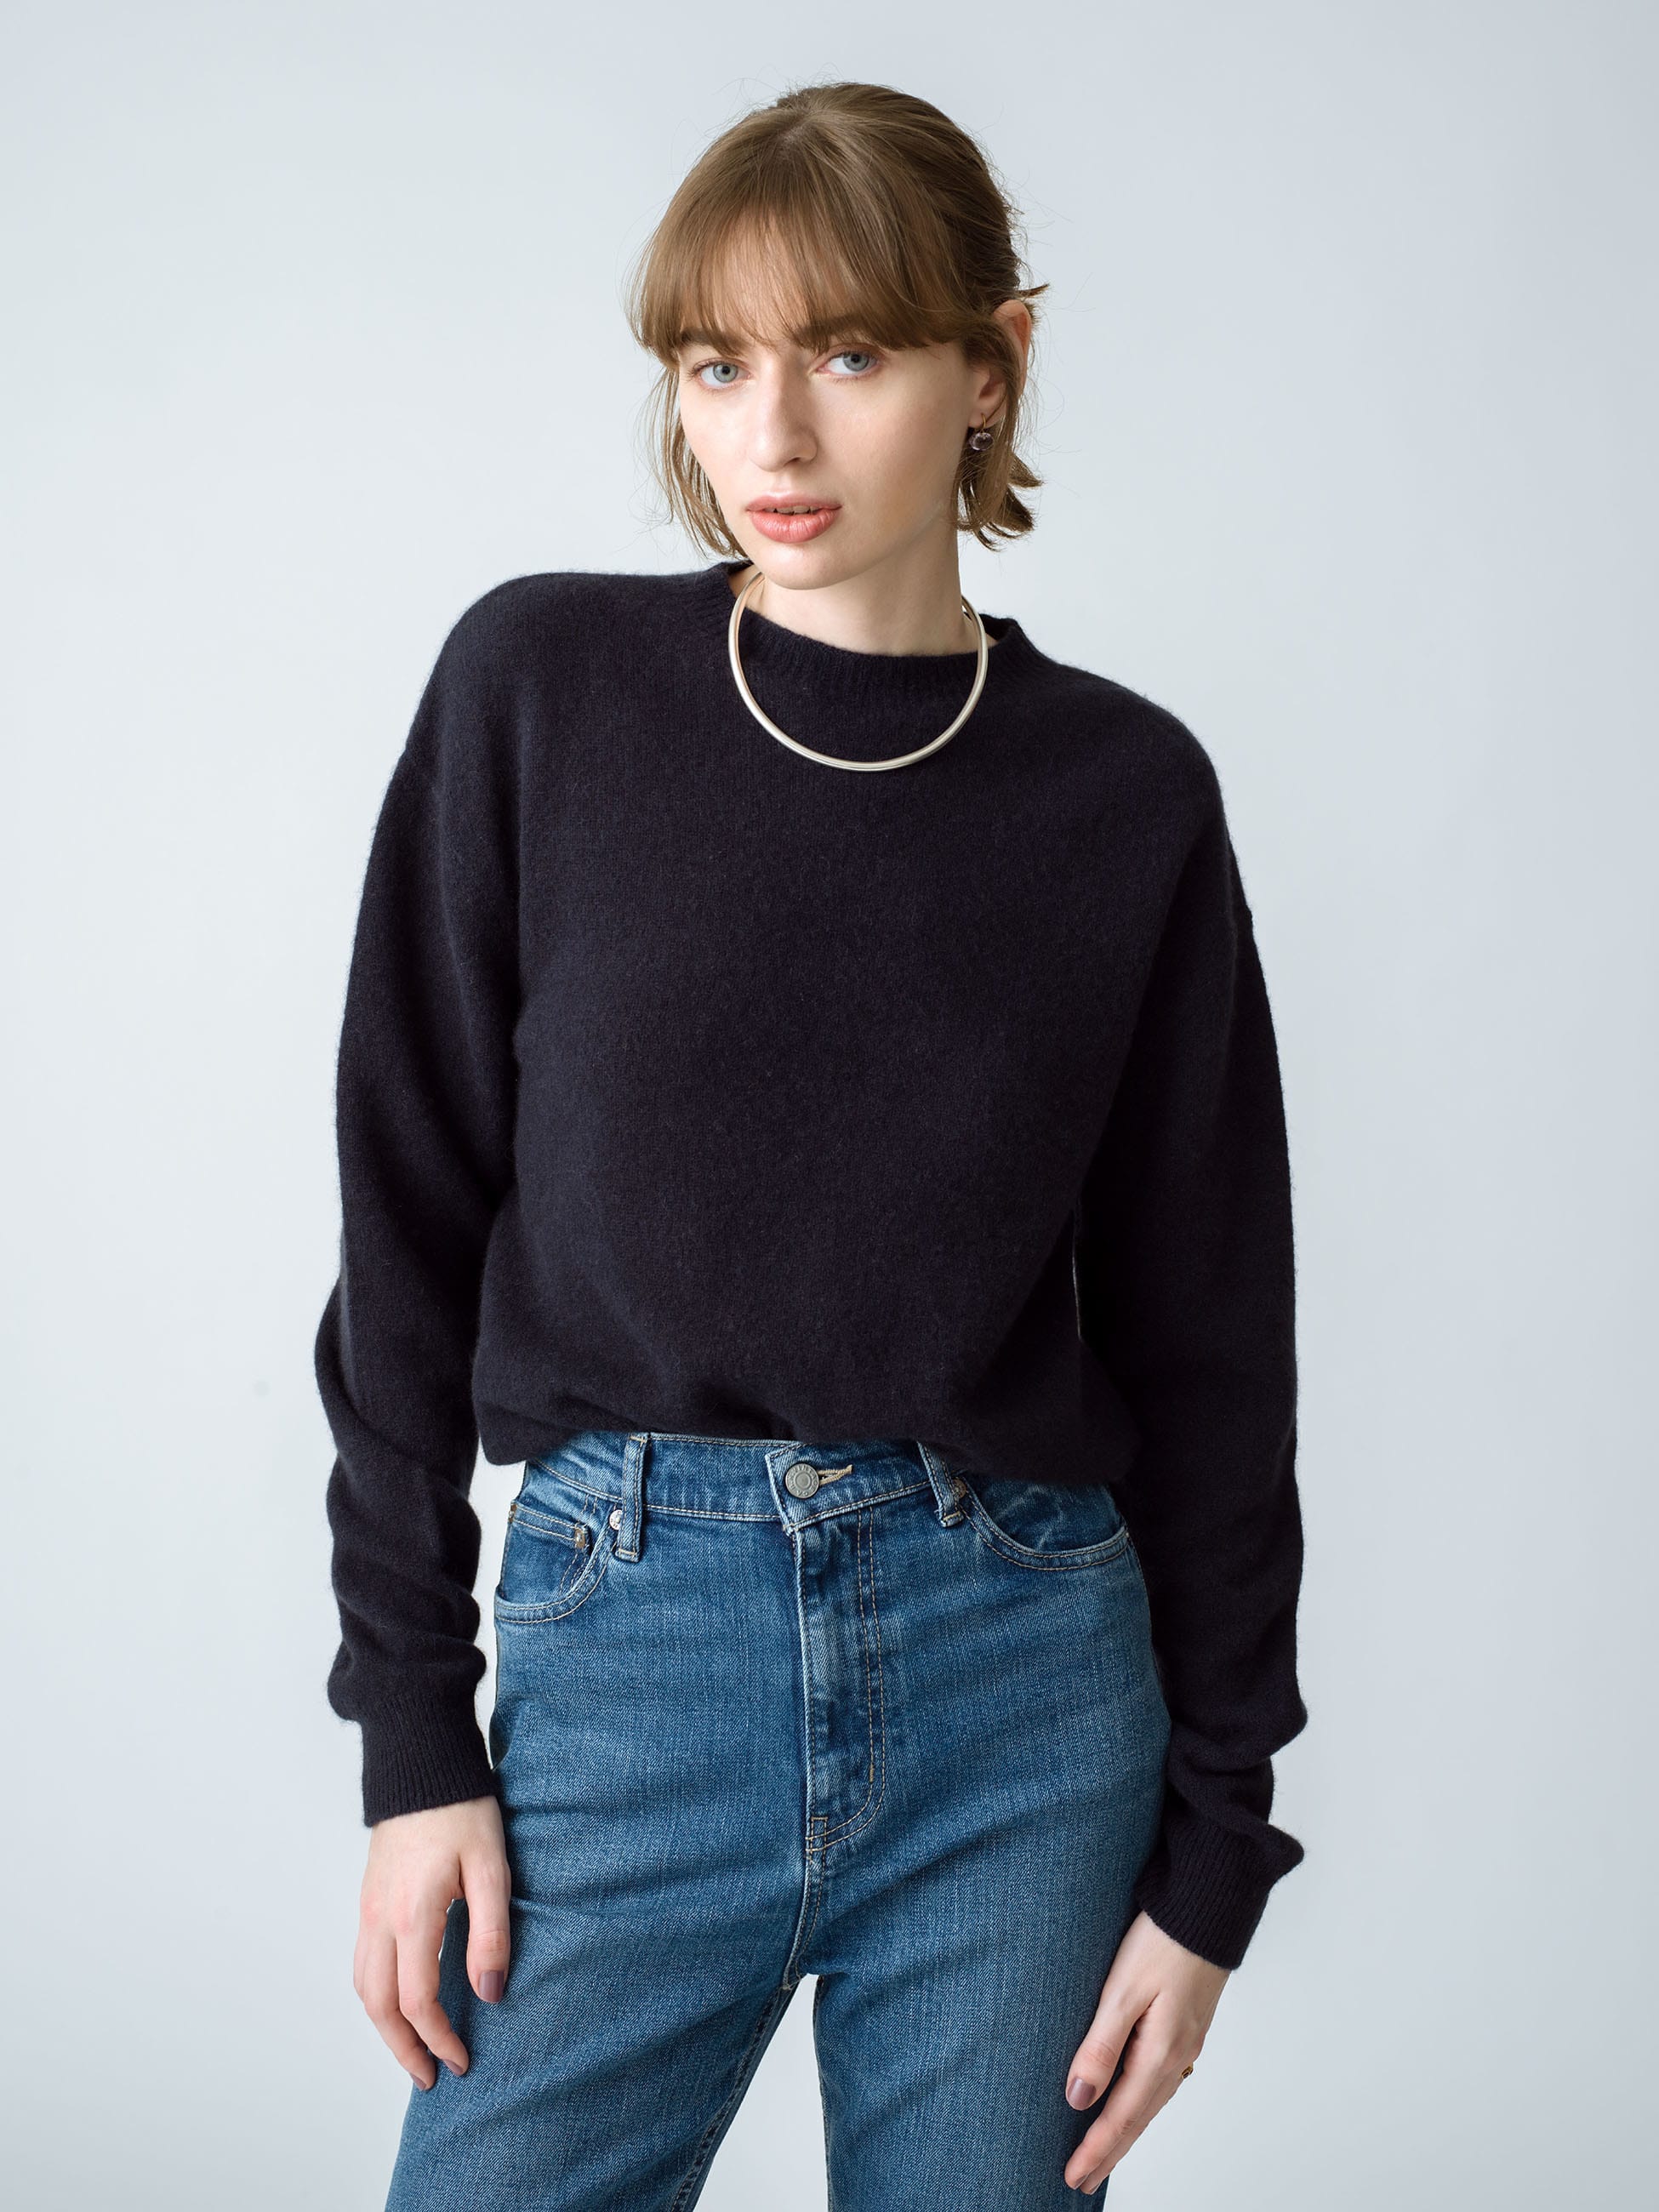 Cashmere Crew Neck Knit Pullover｜8100(エイティワンハンドレッド